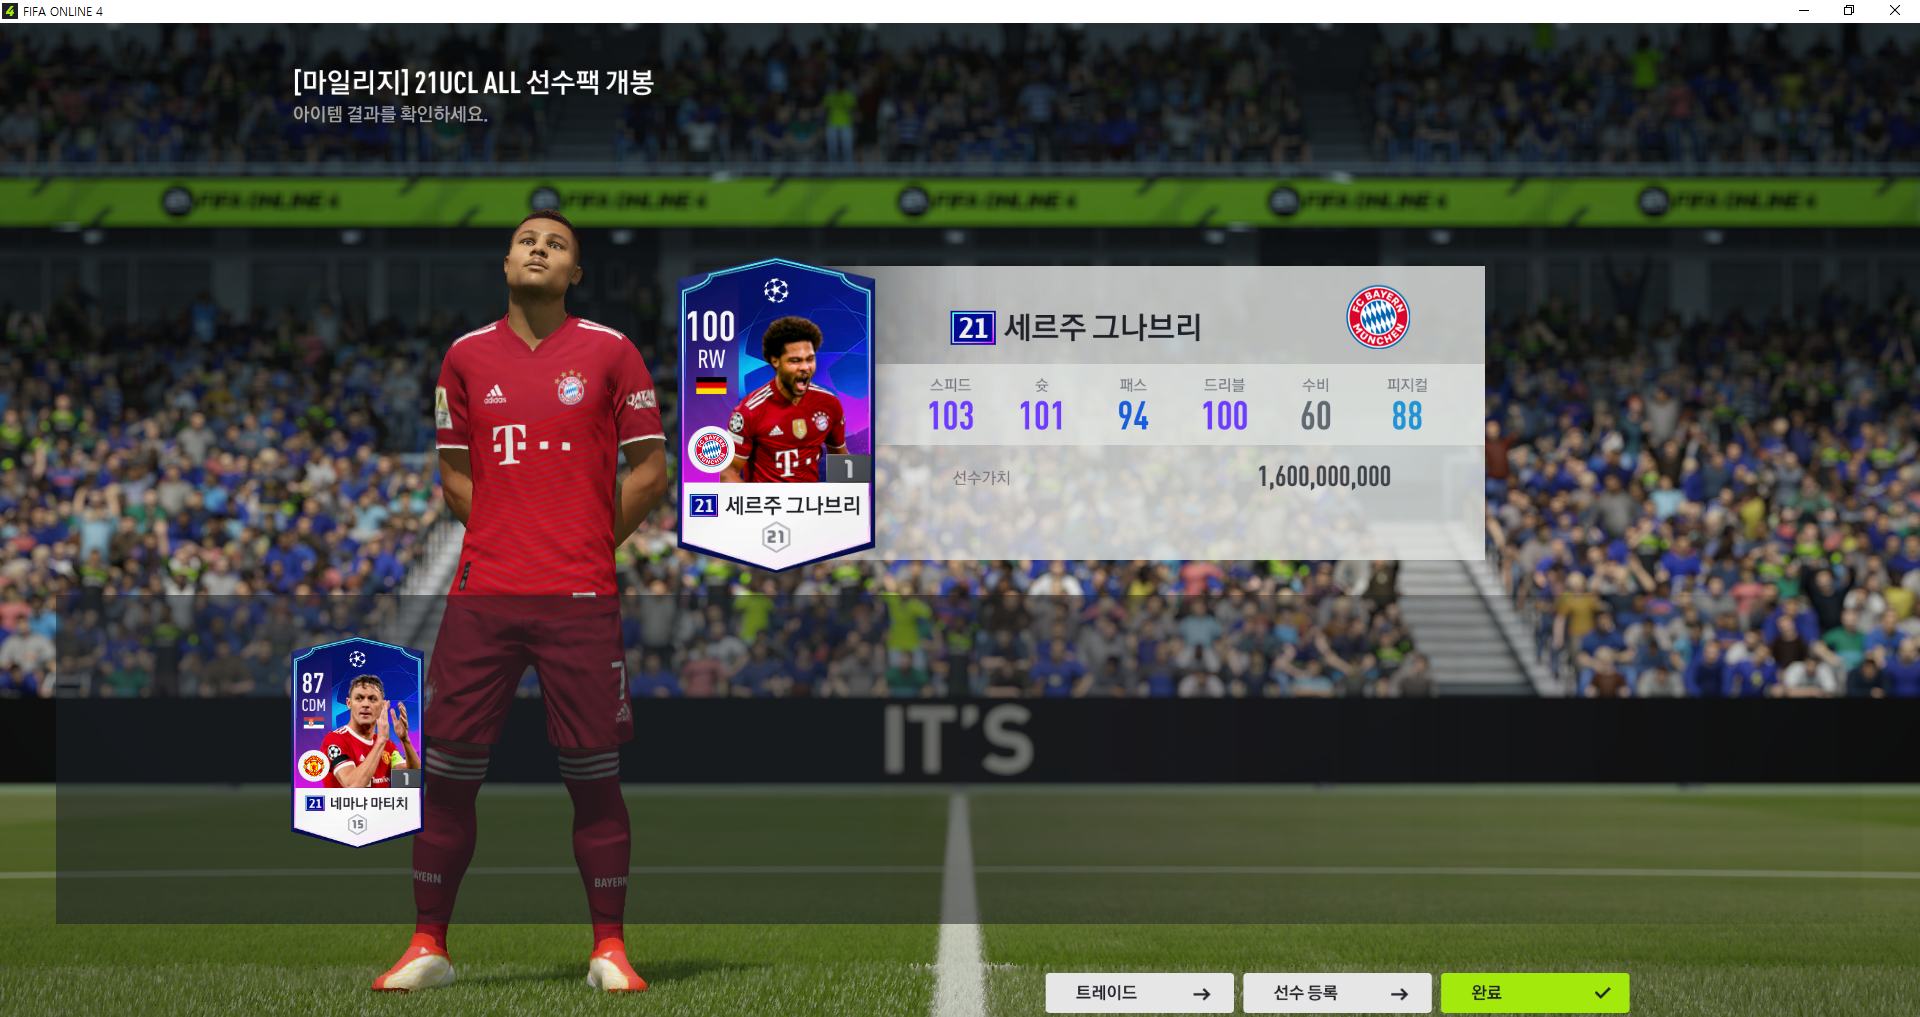 FIFA ONLINE 4 2022-02-26 오전 2_36_45.png